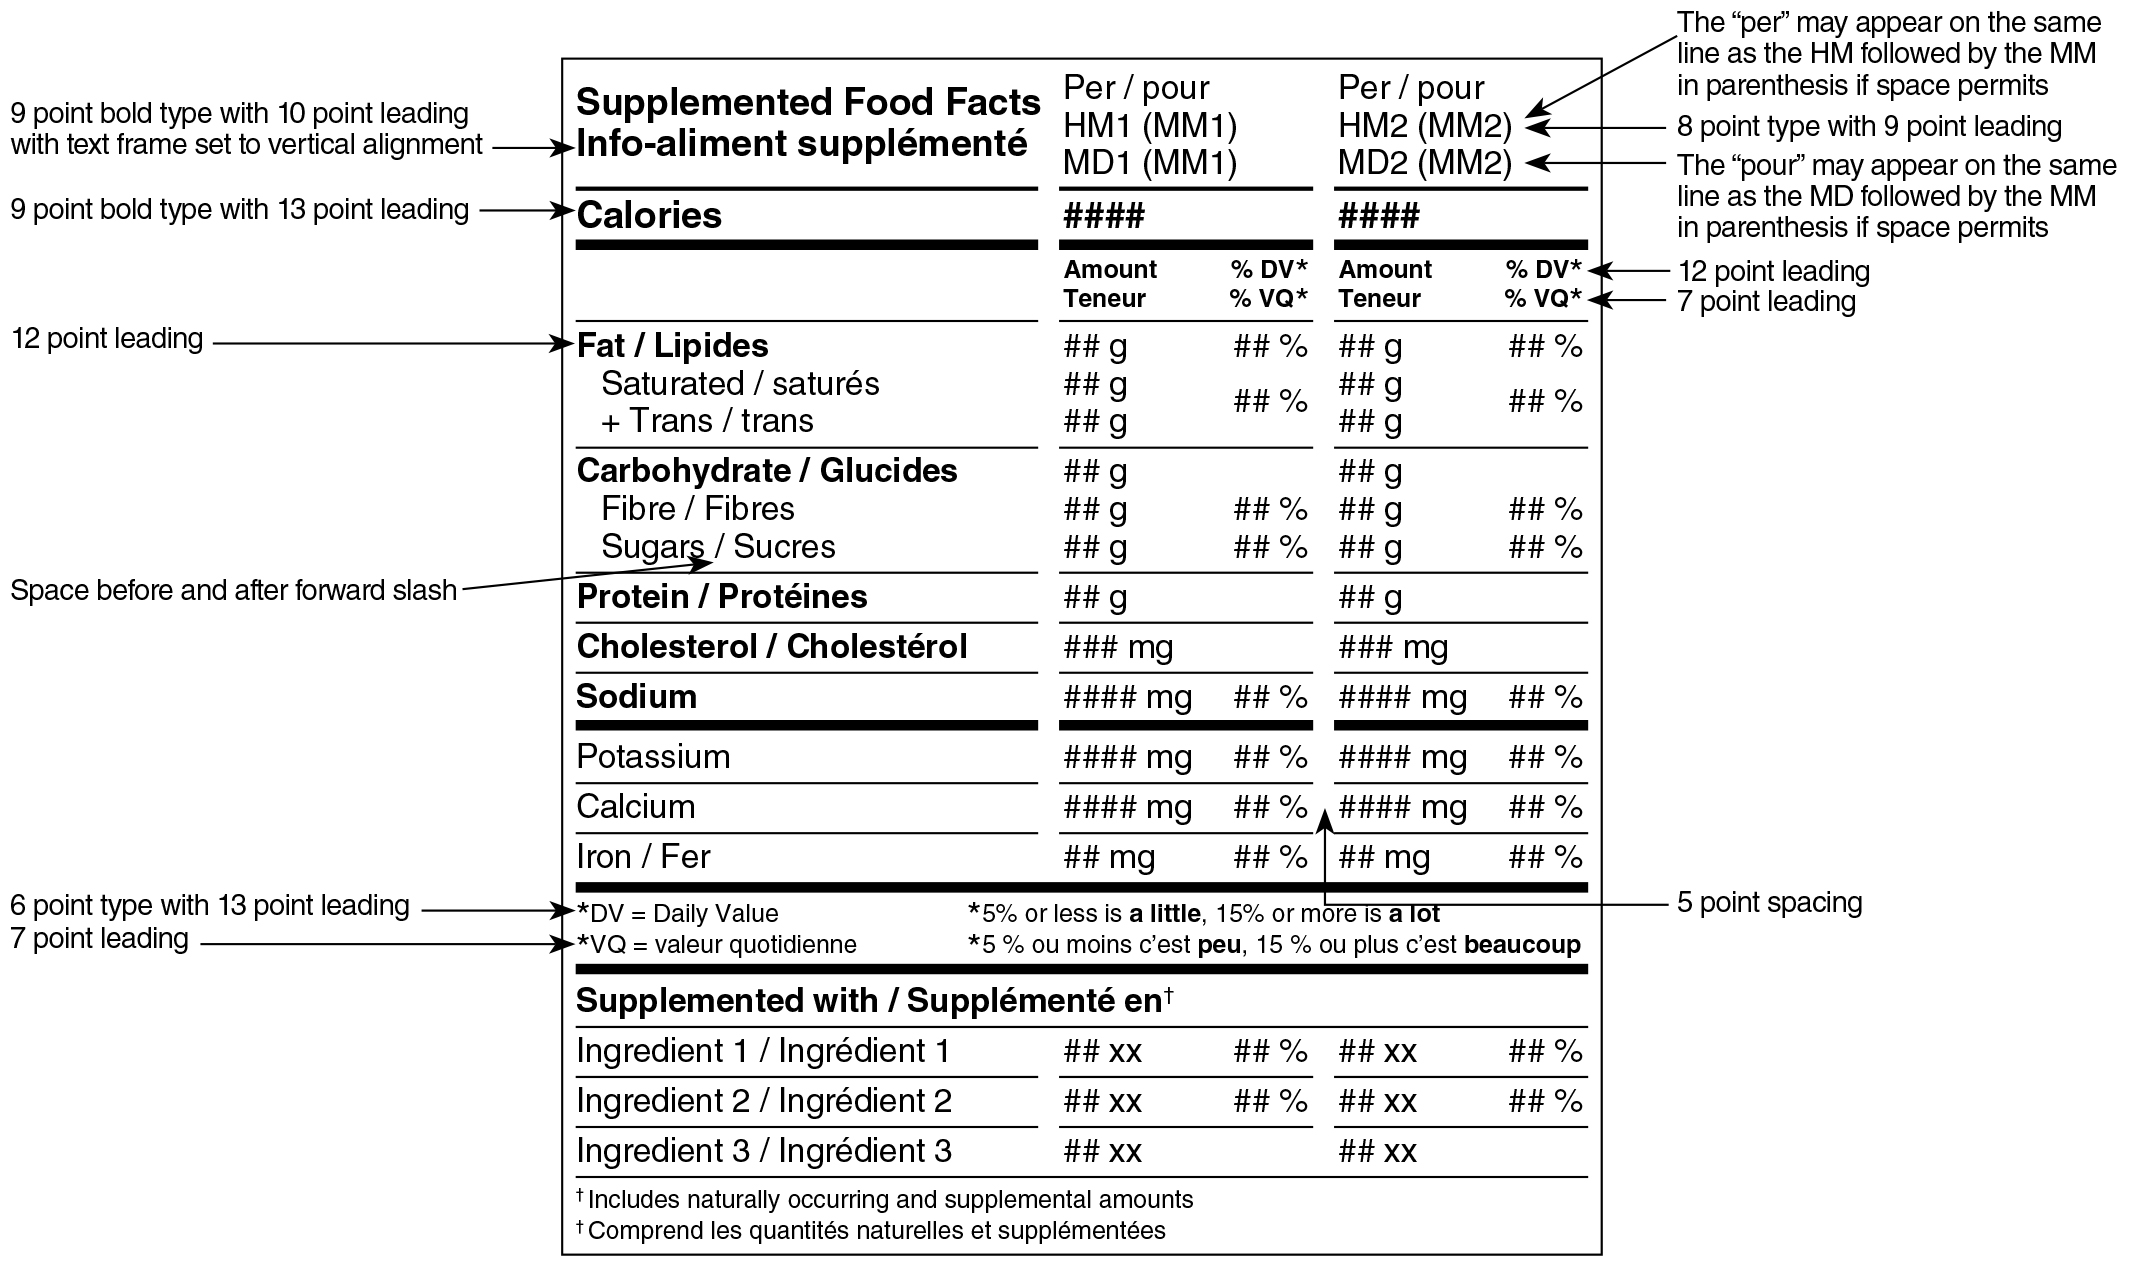 A bilingual Supplemented Food Facts table in aggregate format for two serving sizes surrounded by specifications. Text version below.